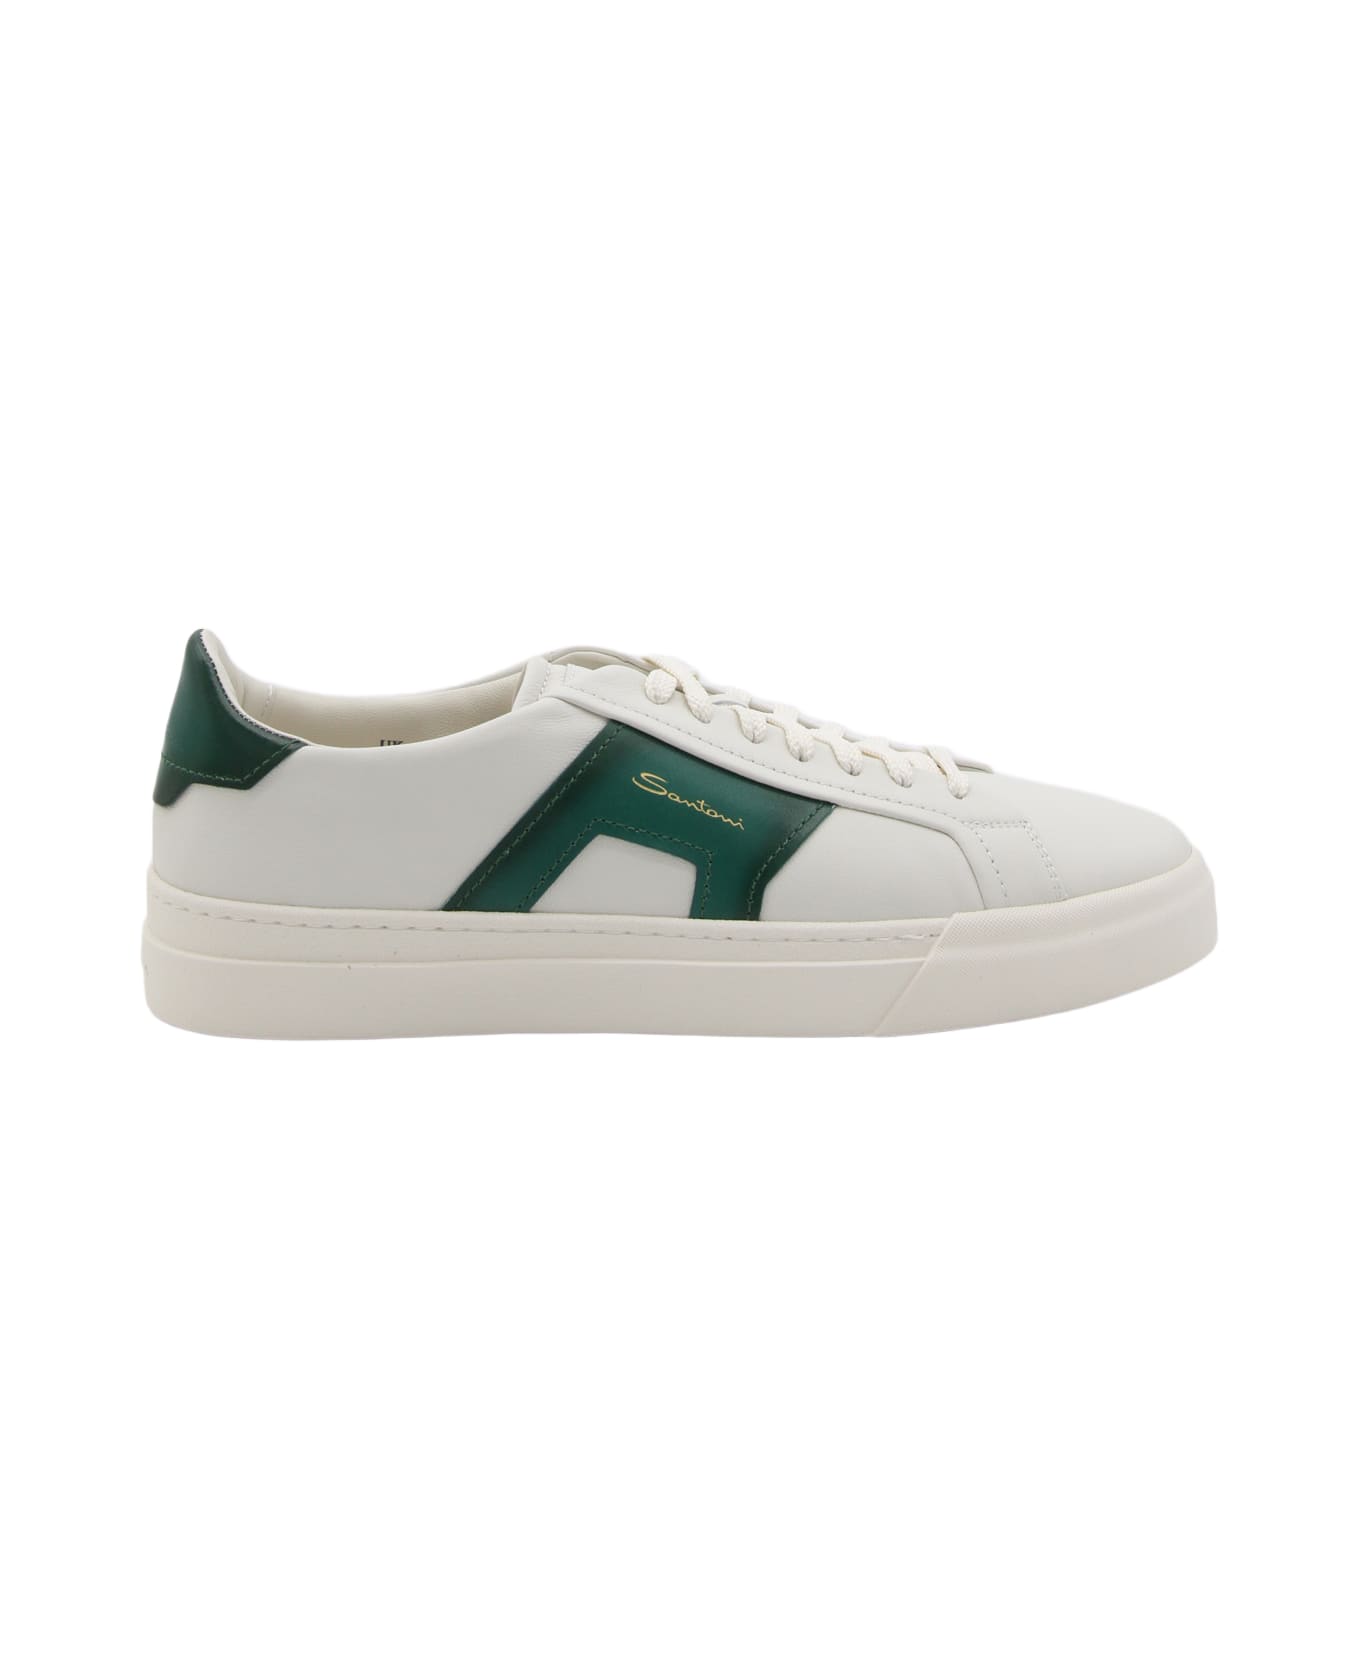 Santoni White And Green Leather Sneakers - White